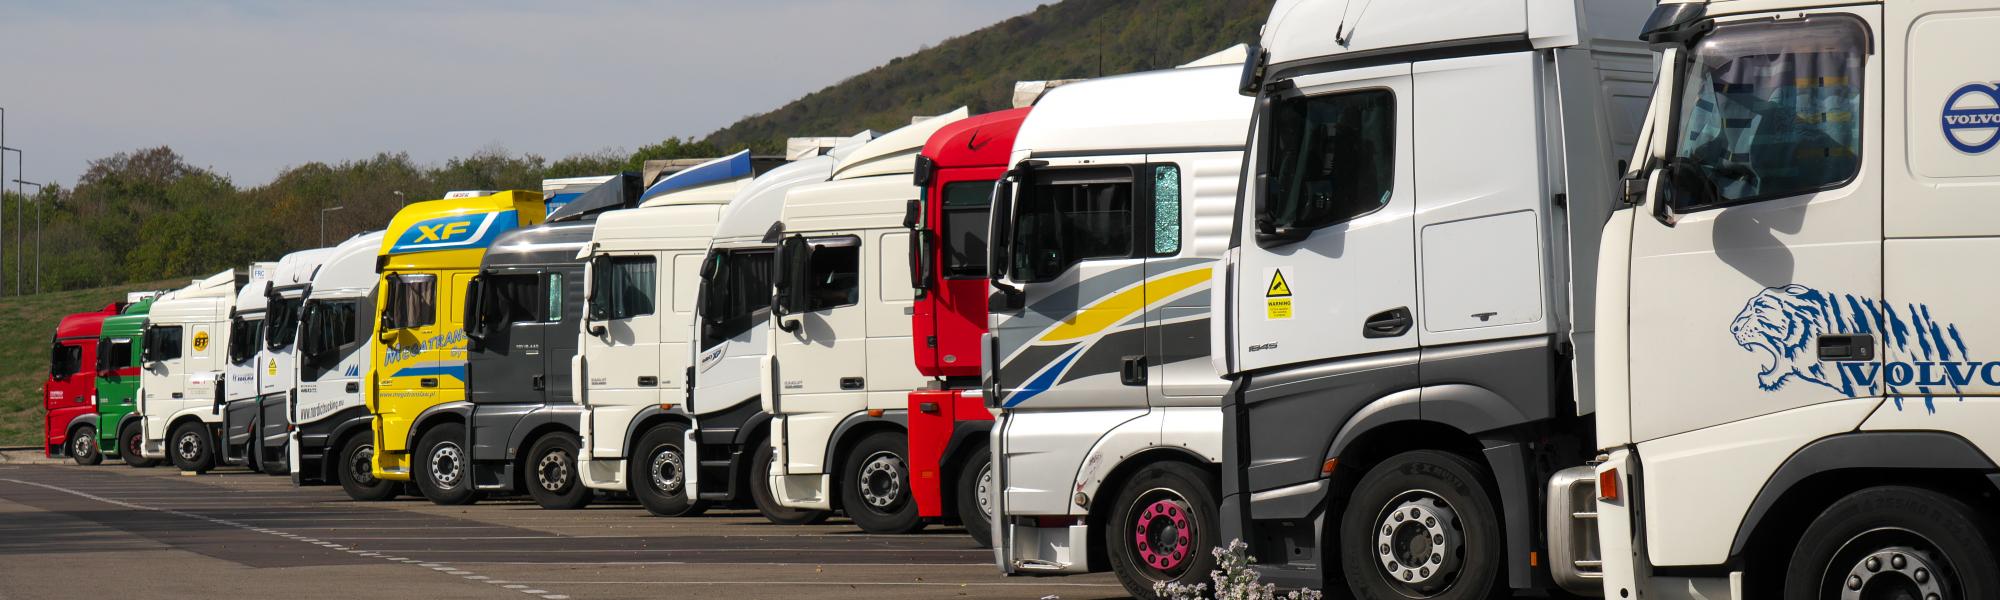 COVID-19 still casting a shadow over French trucking firms